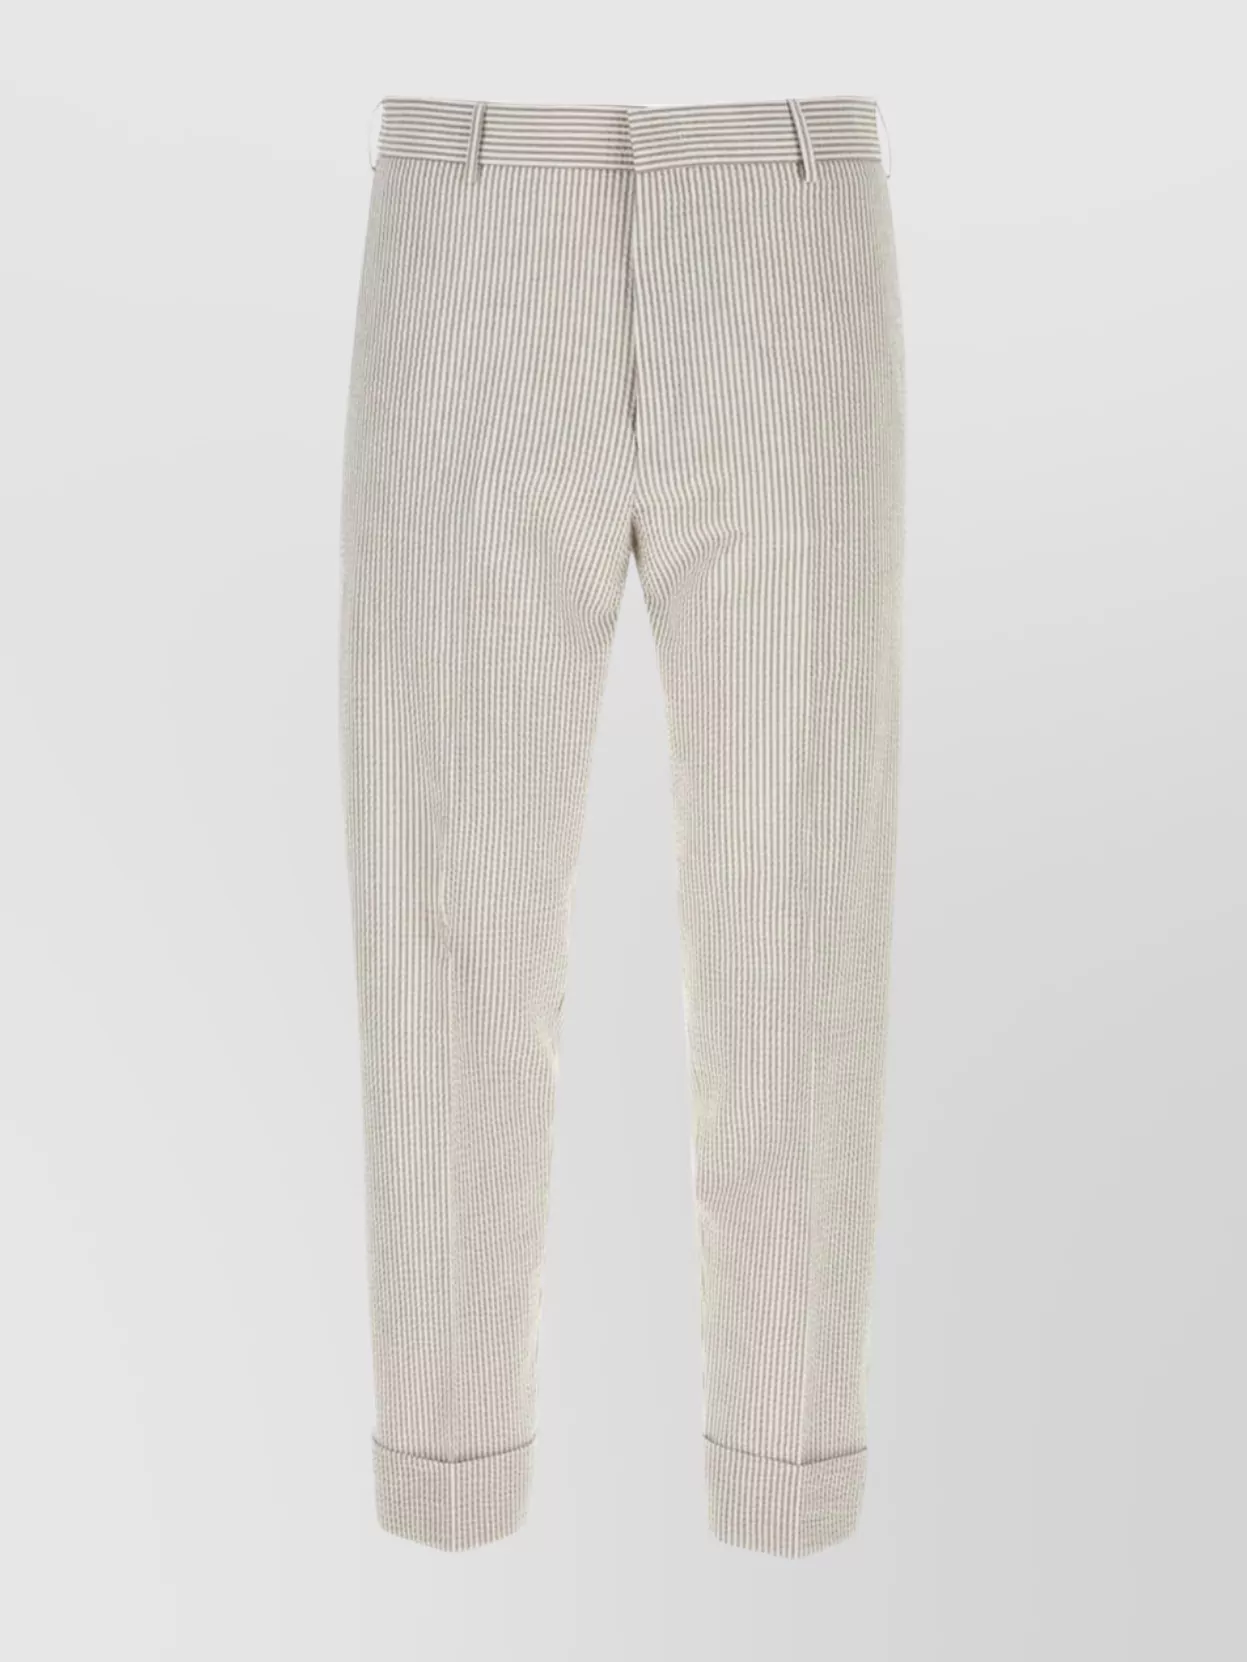 Pt Torino Embroidered Stretch Cotton Pant With Ribbed Texture In Neutral